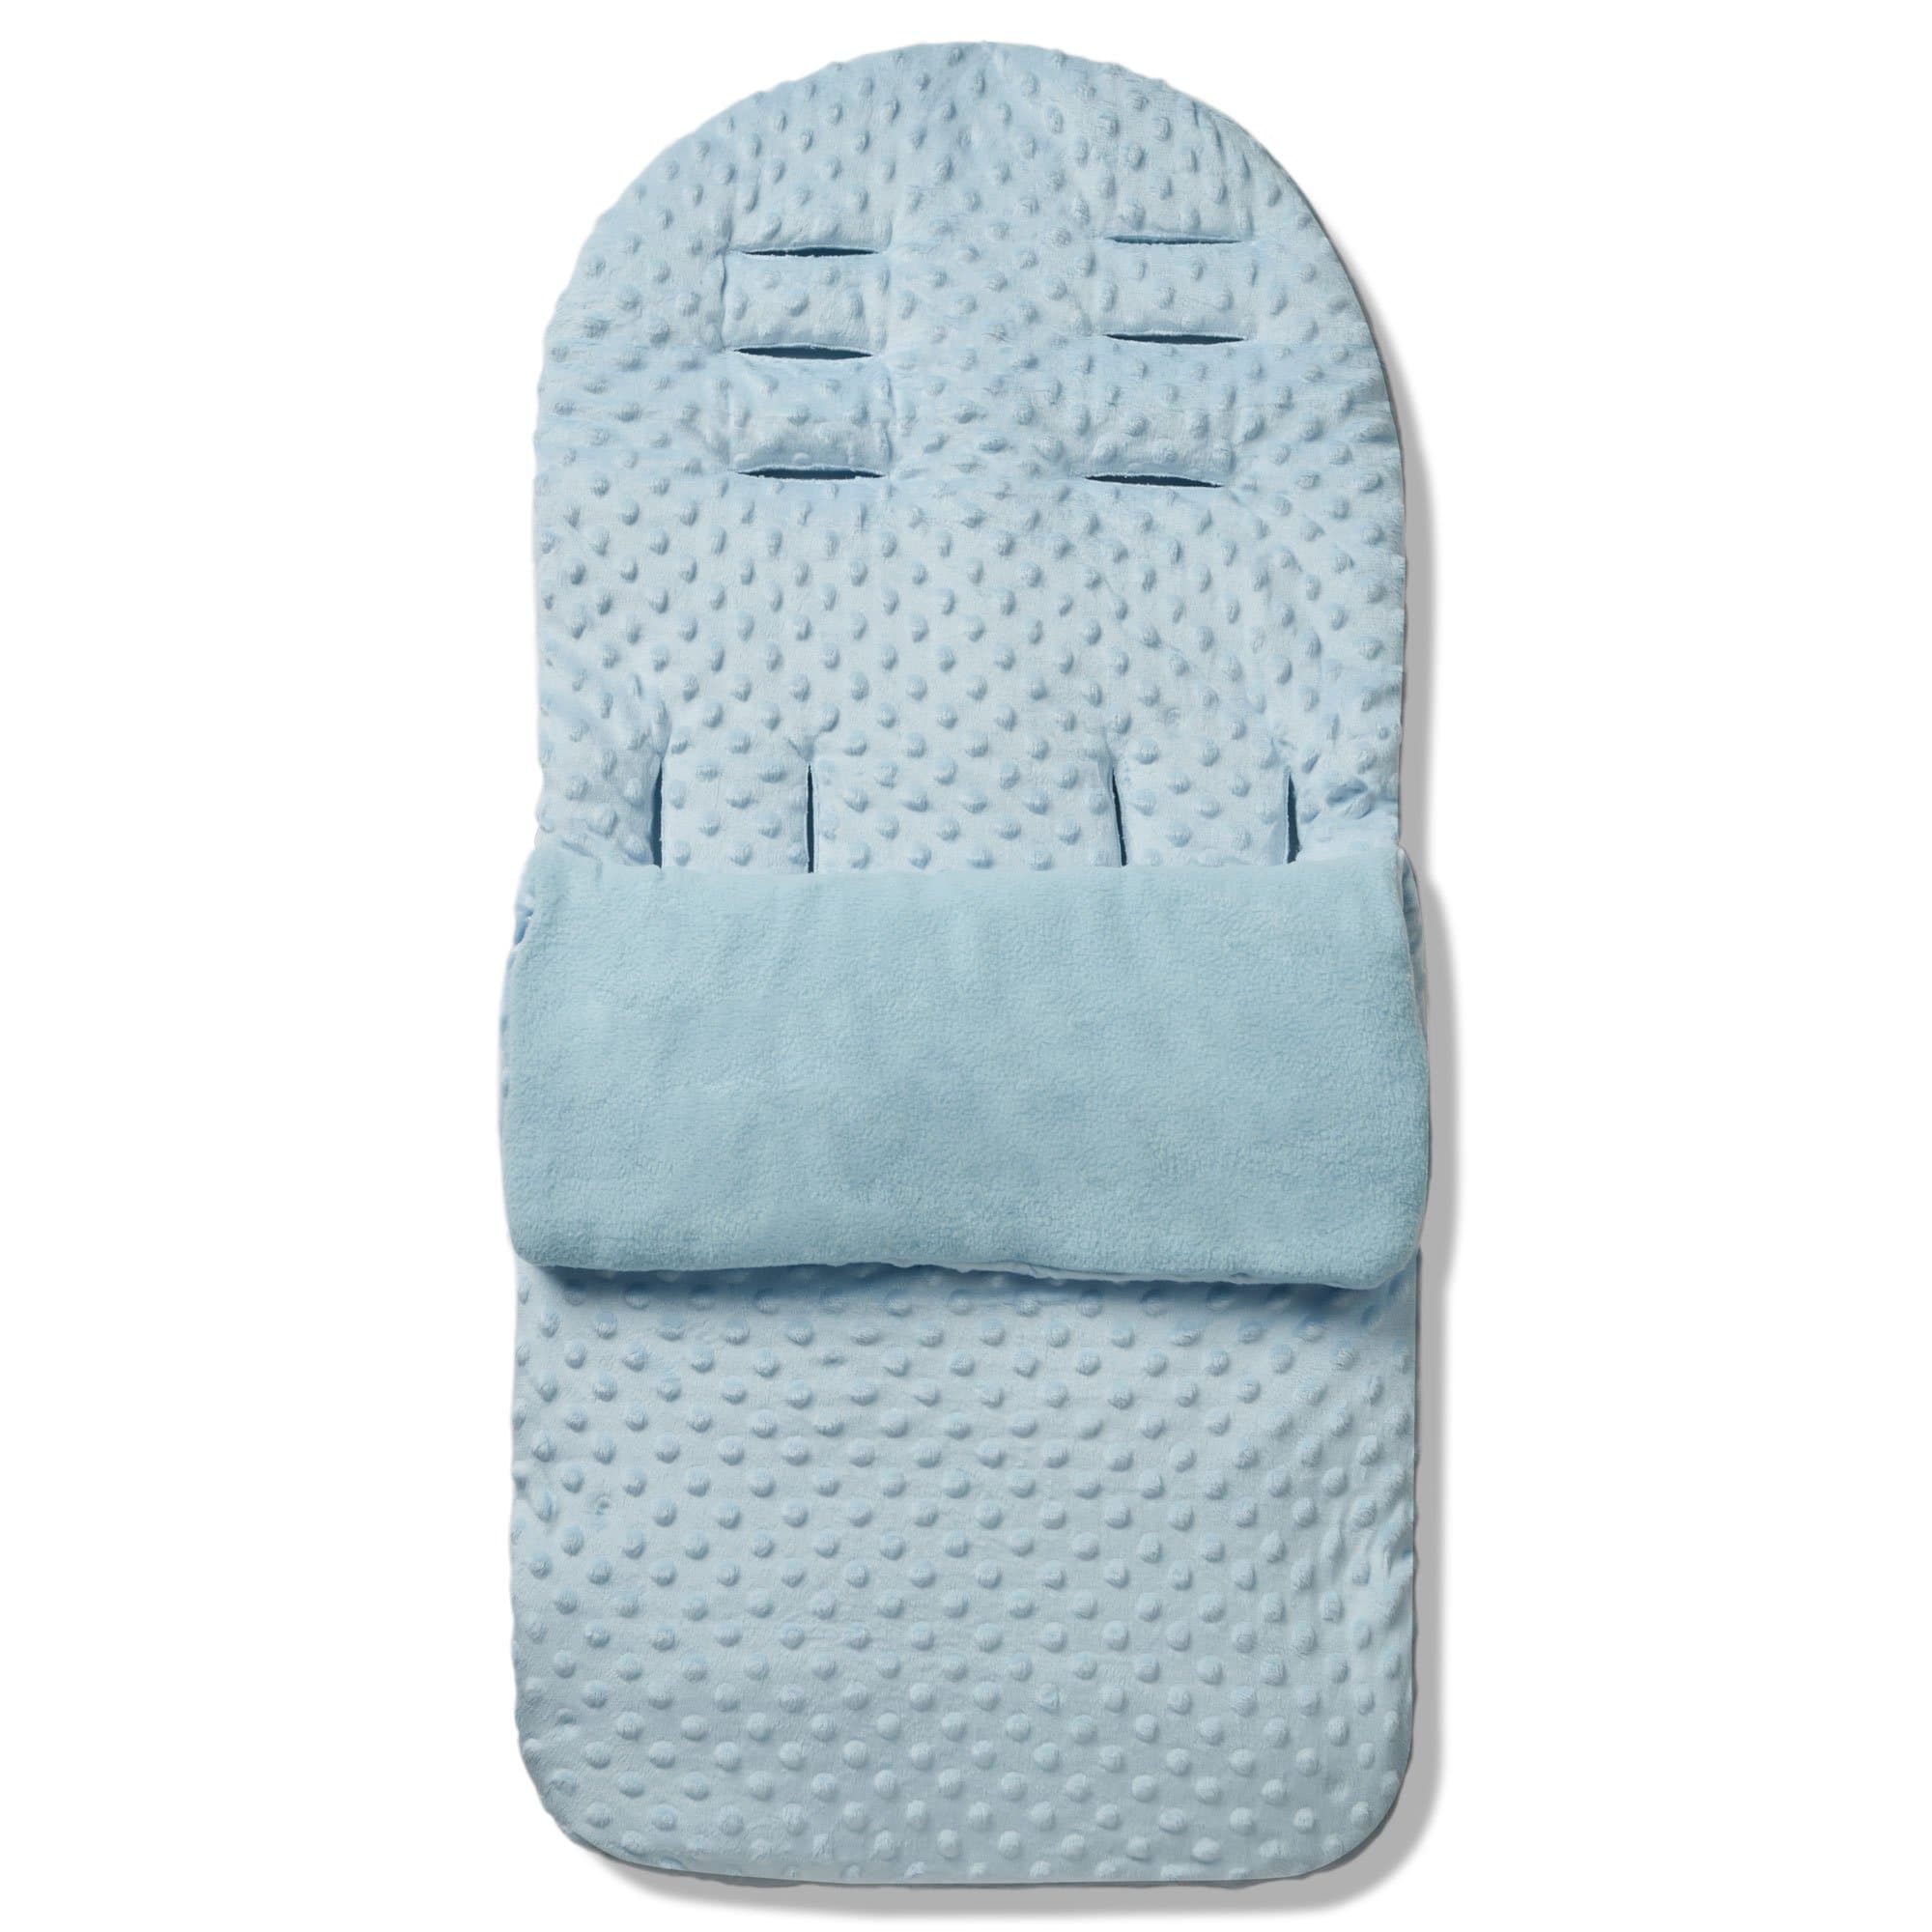 Dimple Footmuff / Cosy Toes Compatible with Cam - Blue / Fits All Models | For Your Little One